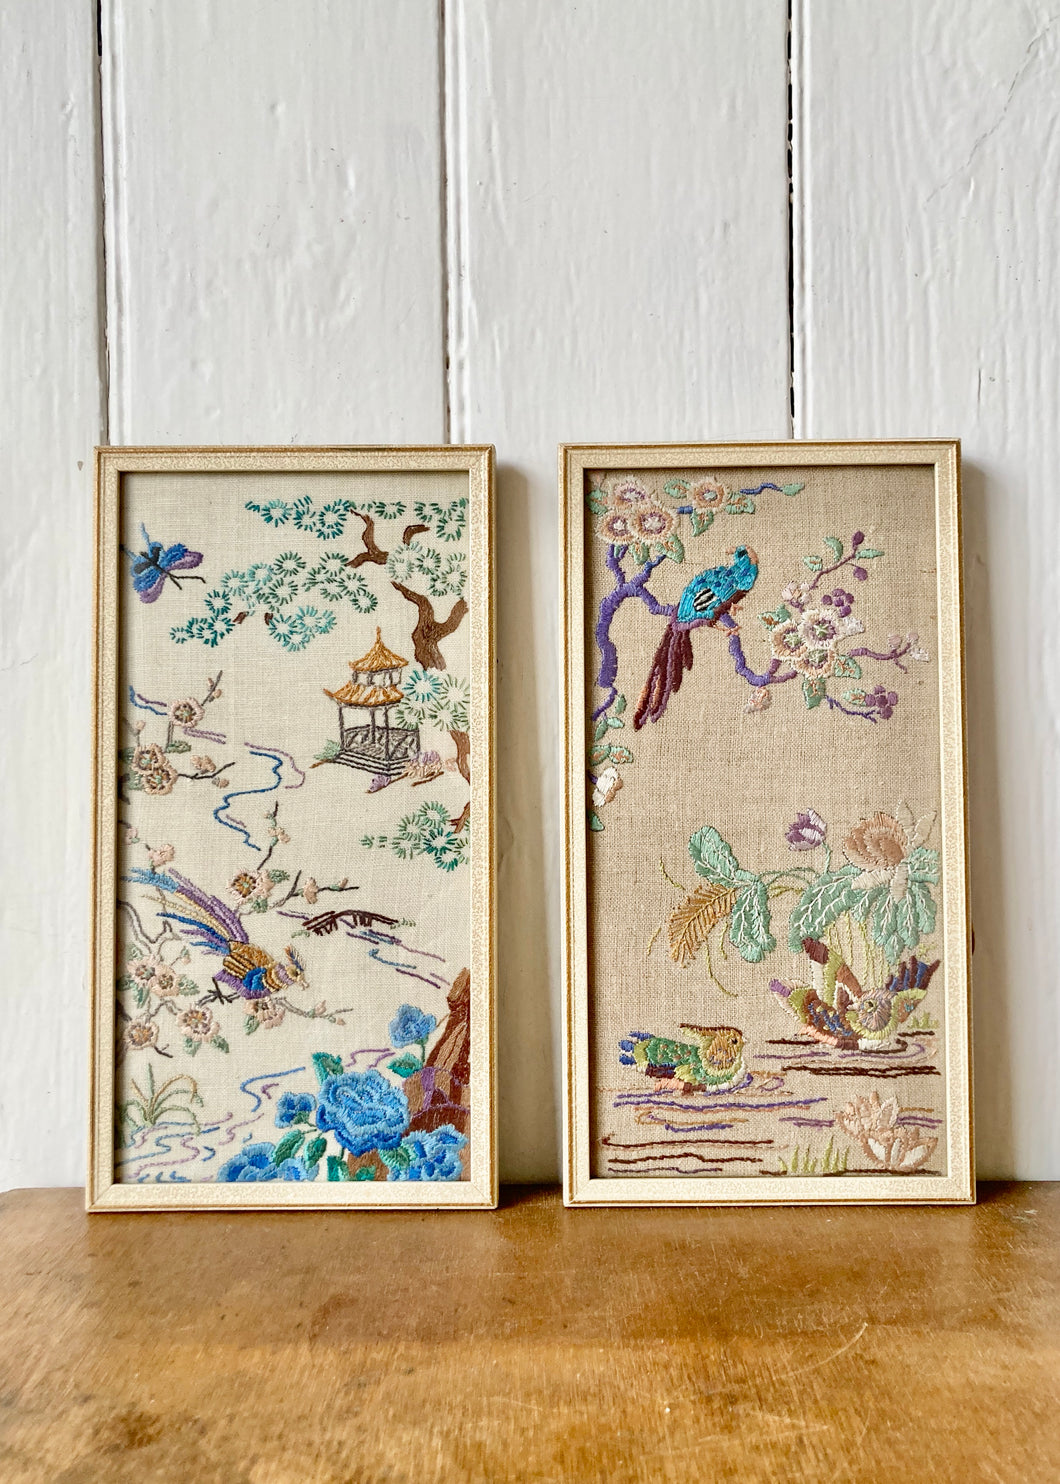 A pair of framed embroidered oriental-style panels